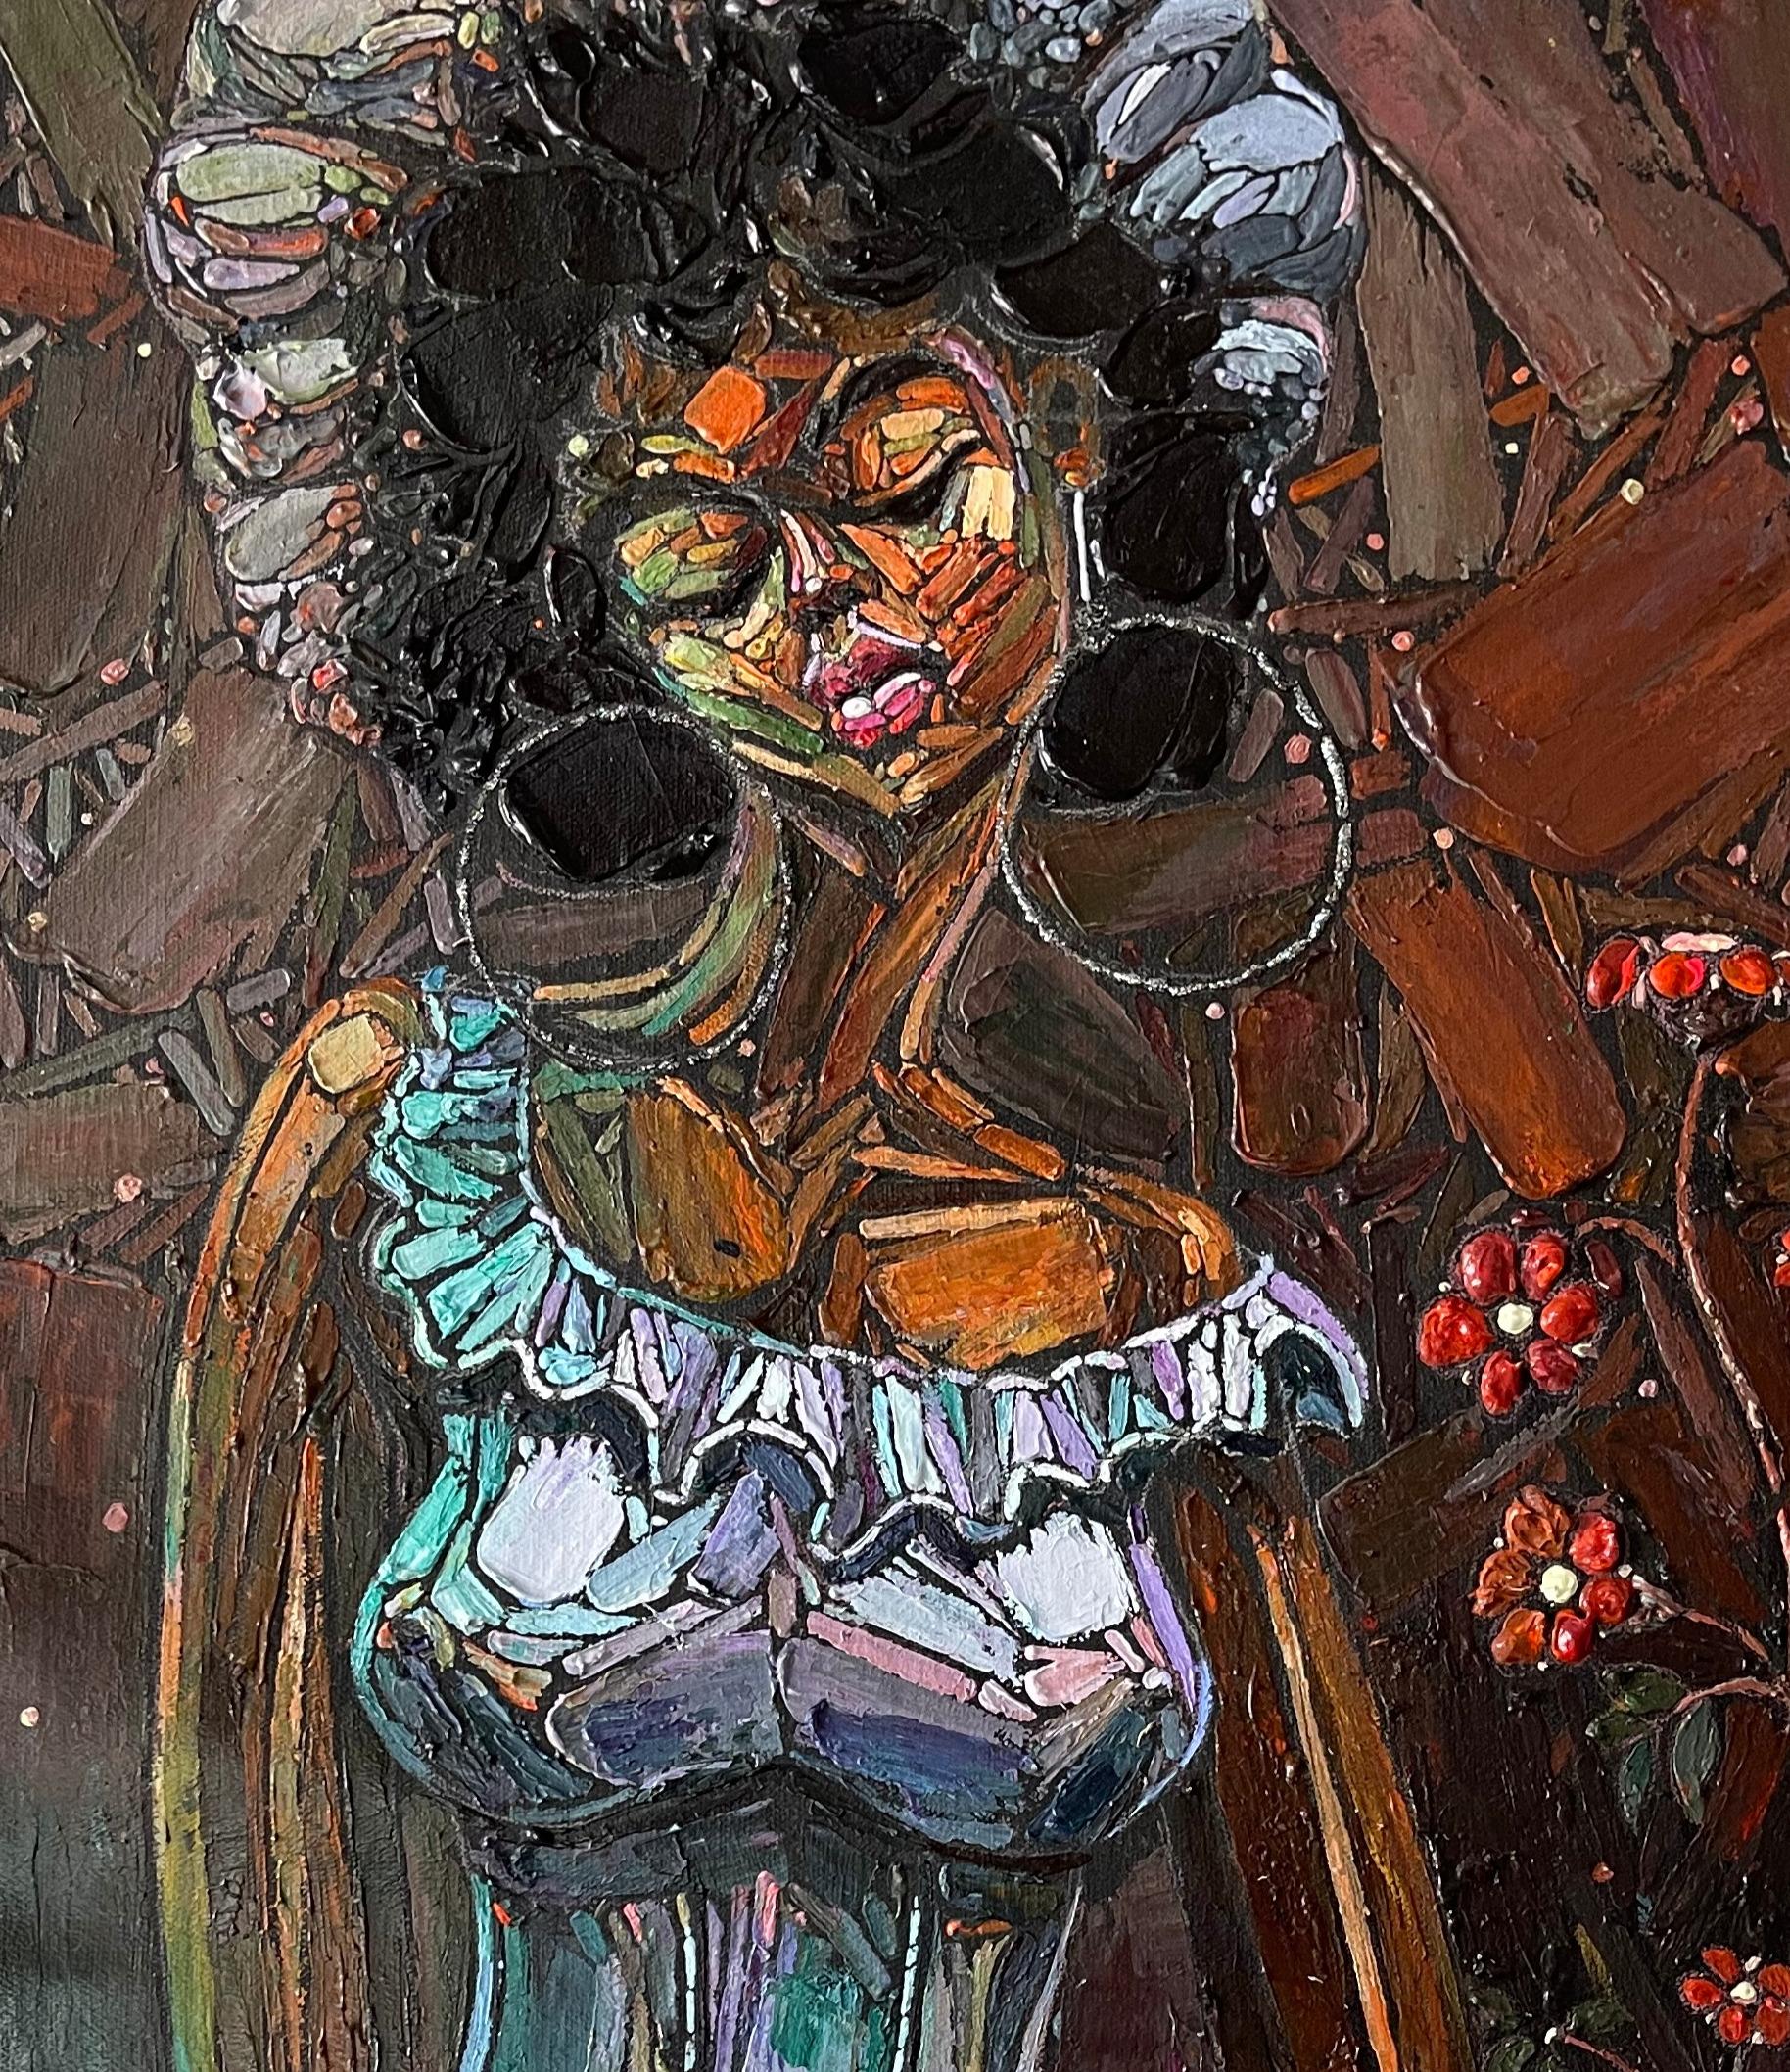 Beauty and Time is an original painting by Segun Philips. Segun created Beauty and Time with Acrylic on a 15W by 24H inches primed canvas.

Beauty and Time depict the outer beauty as something that fades away with time, so instead of outer beauty,